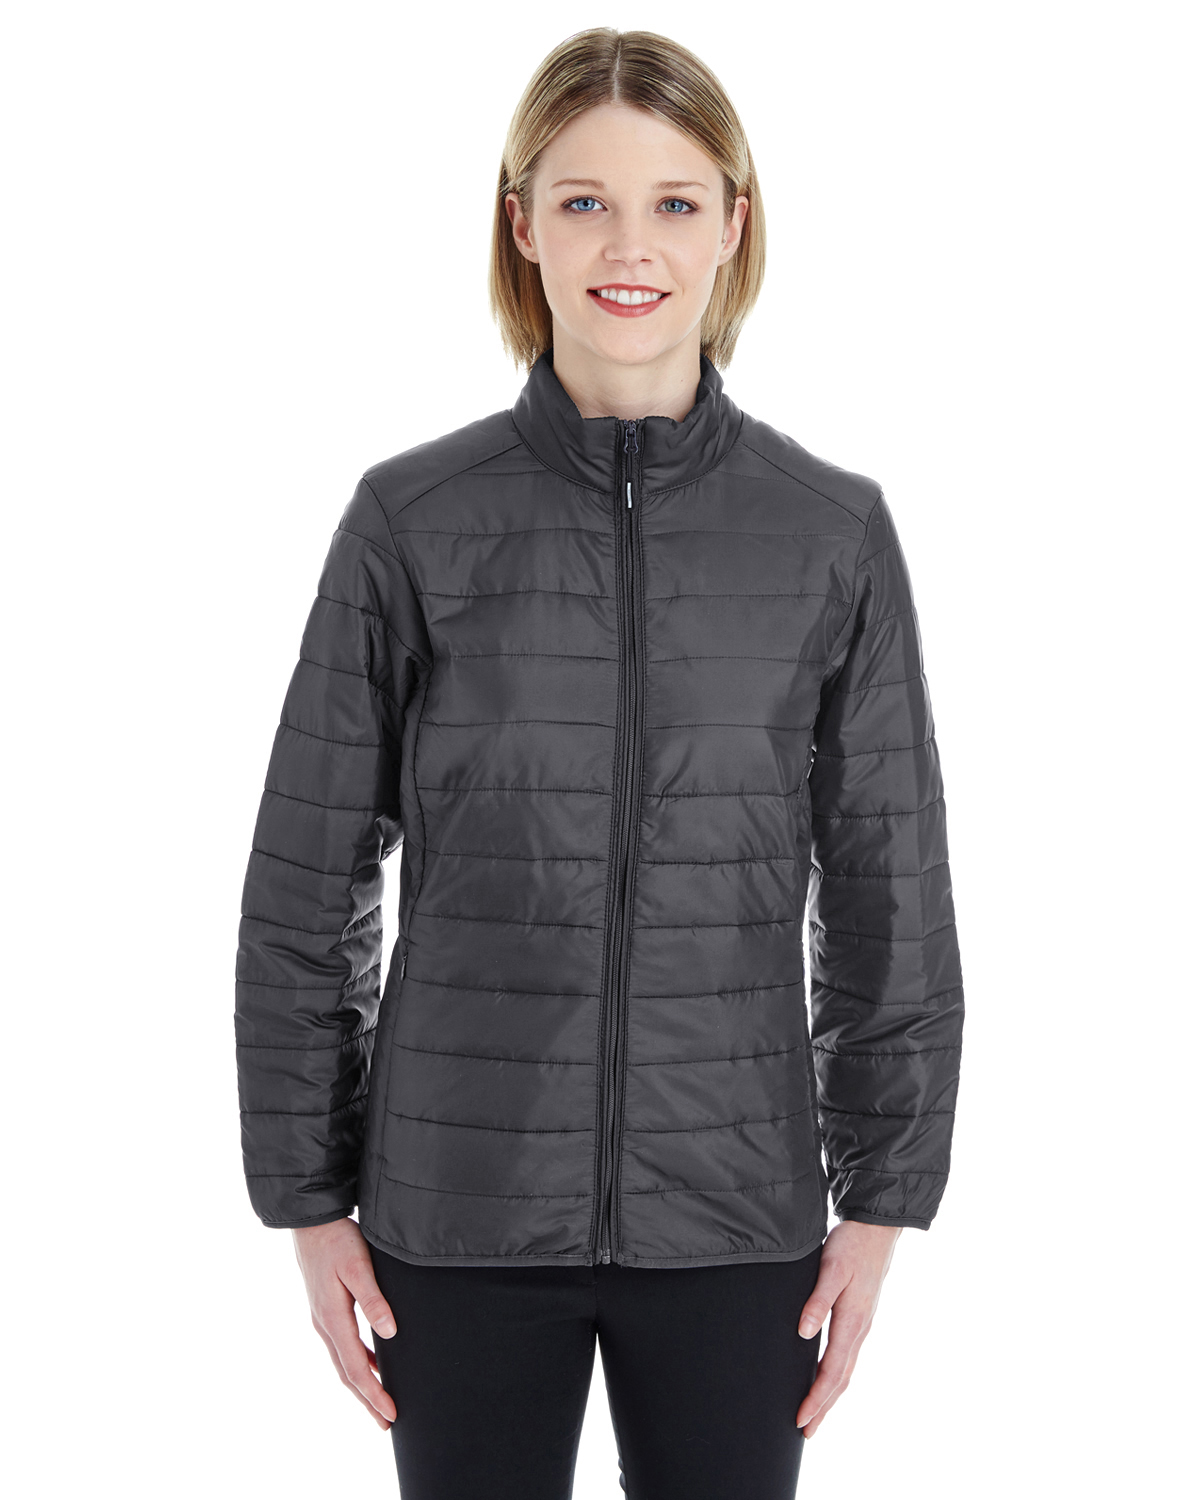 Core 365 CE700W - Ladies' Prevail Packable Puffer